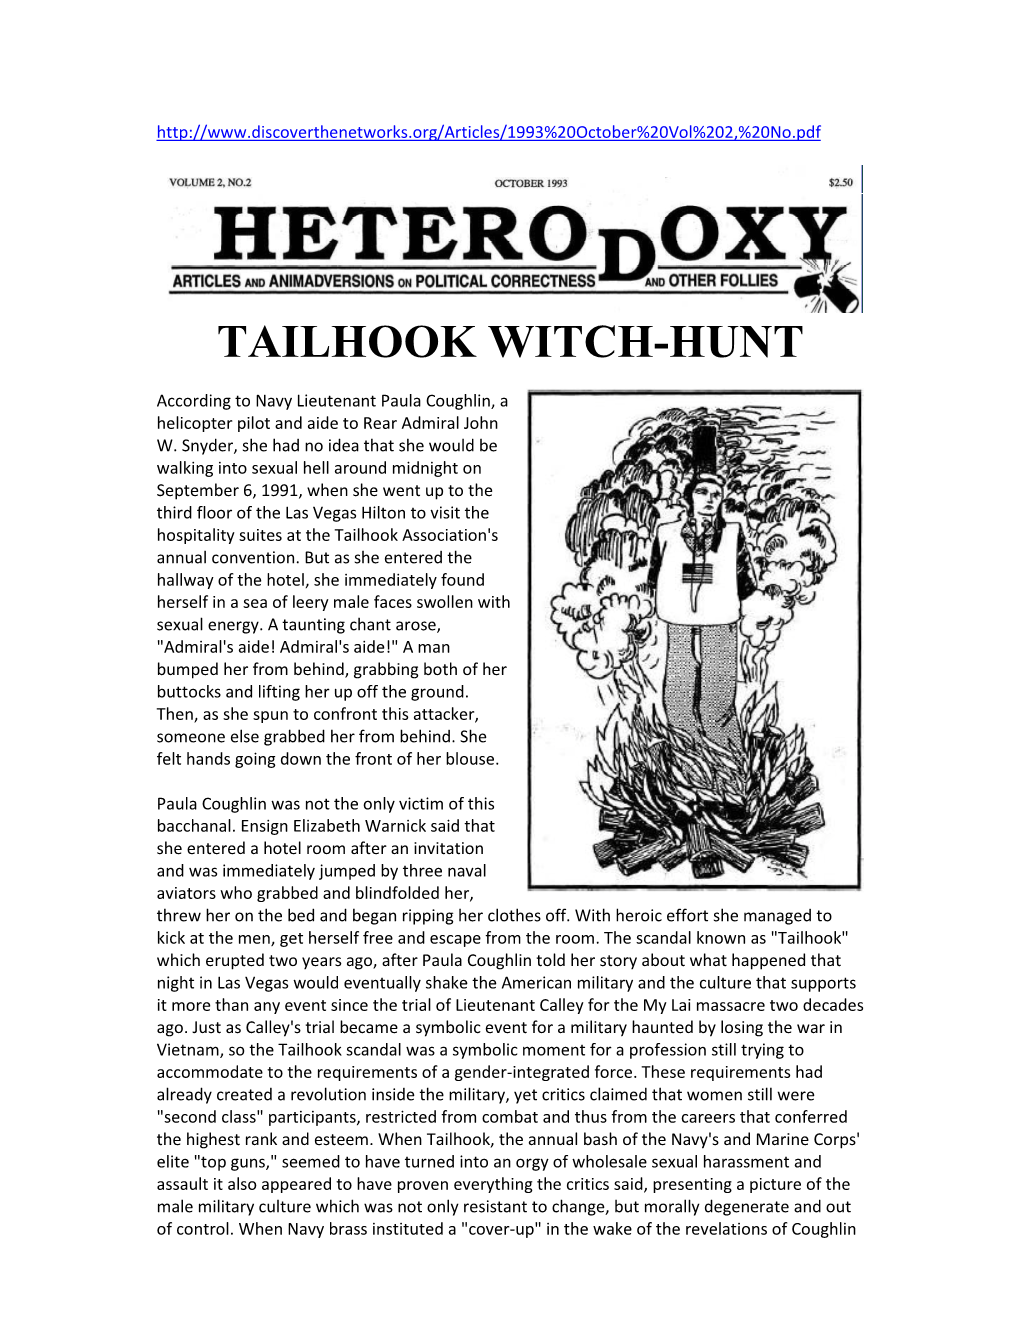 Tailhook Witch-Hunt